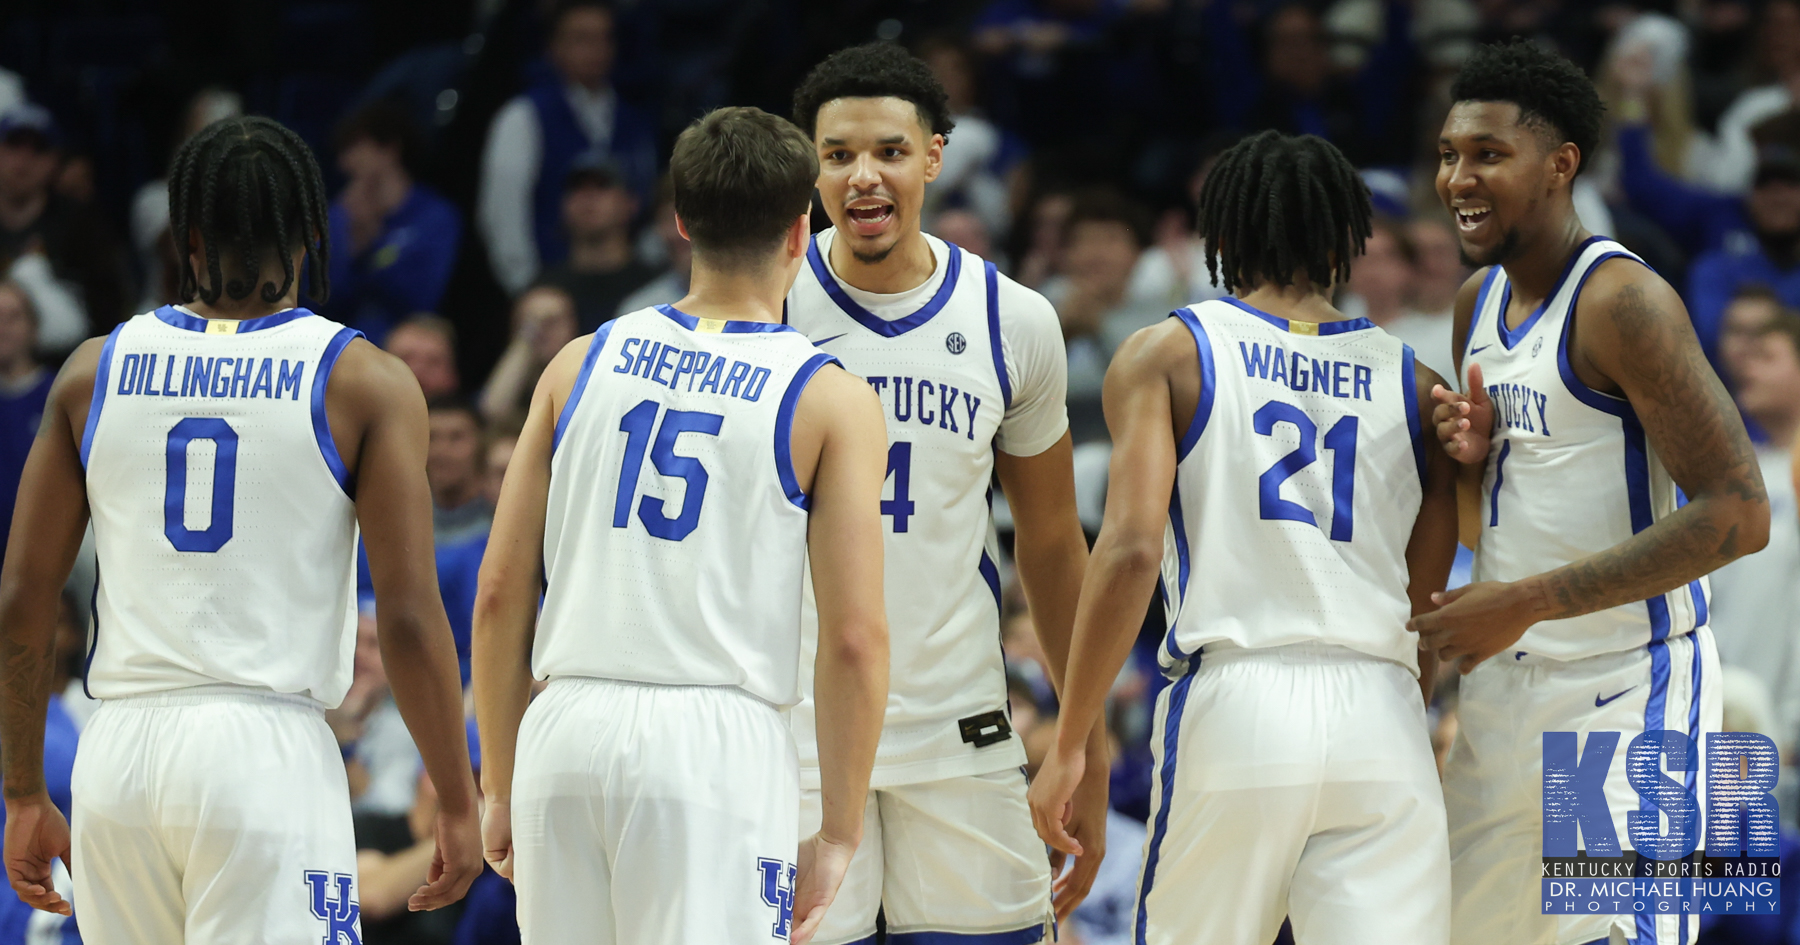 Balanced offense strikes the needle for Kentucky: “All of them can play.”